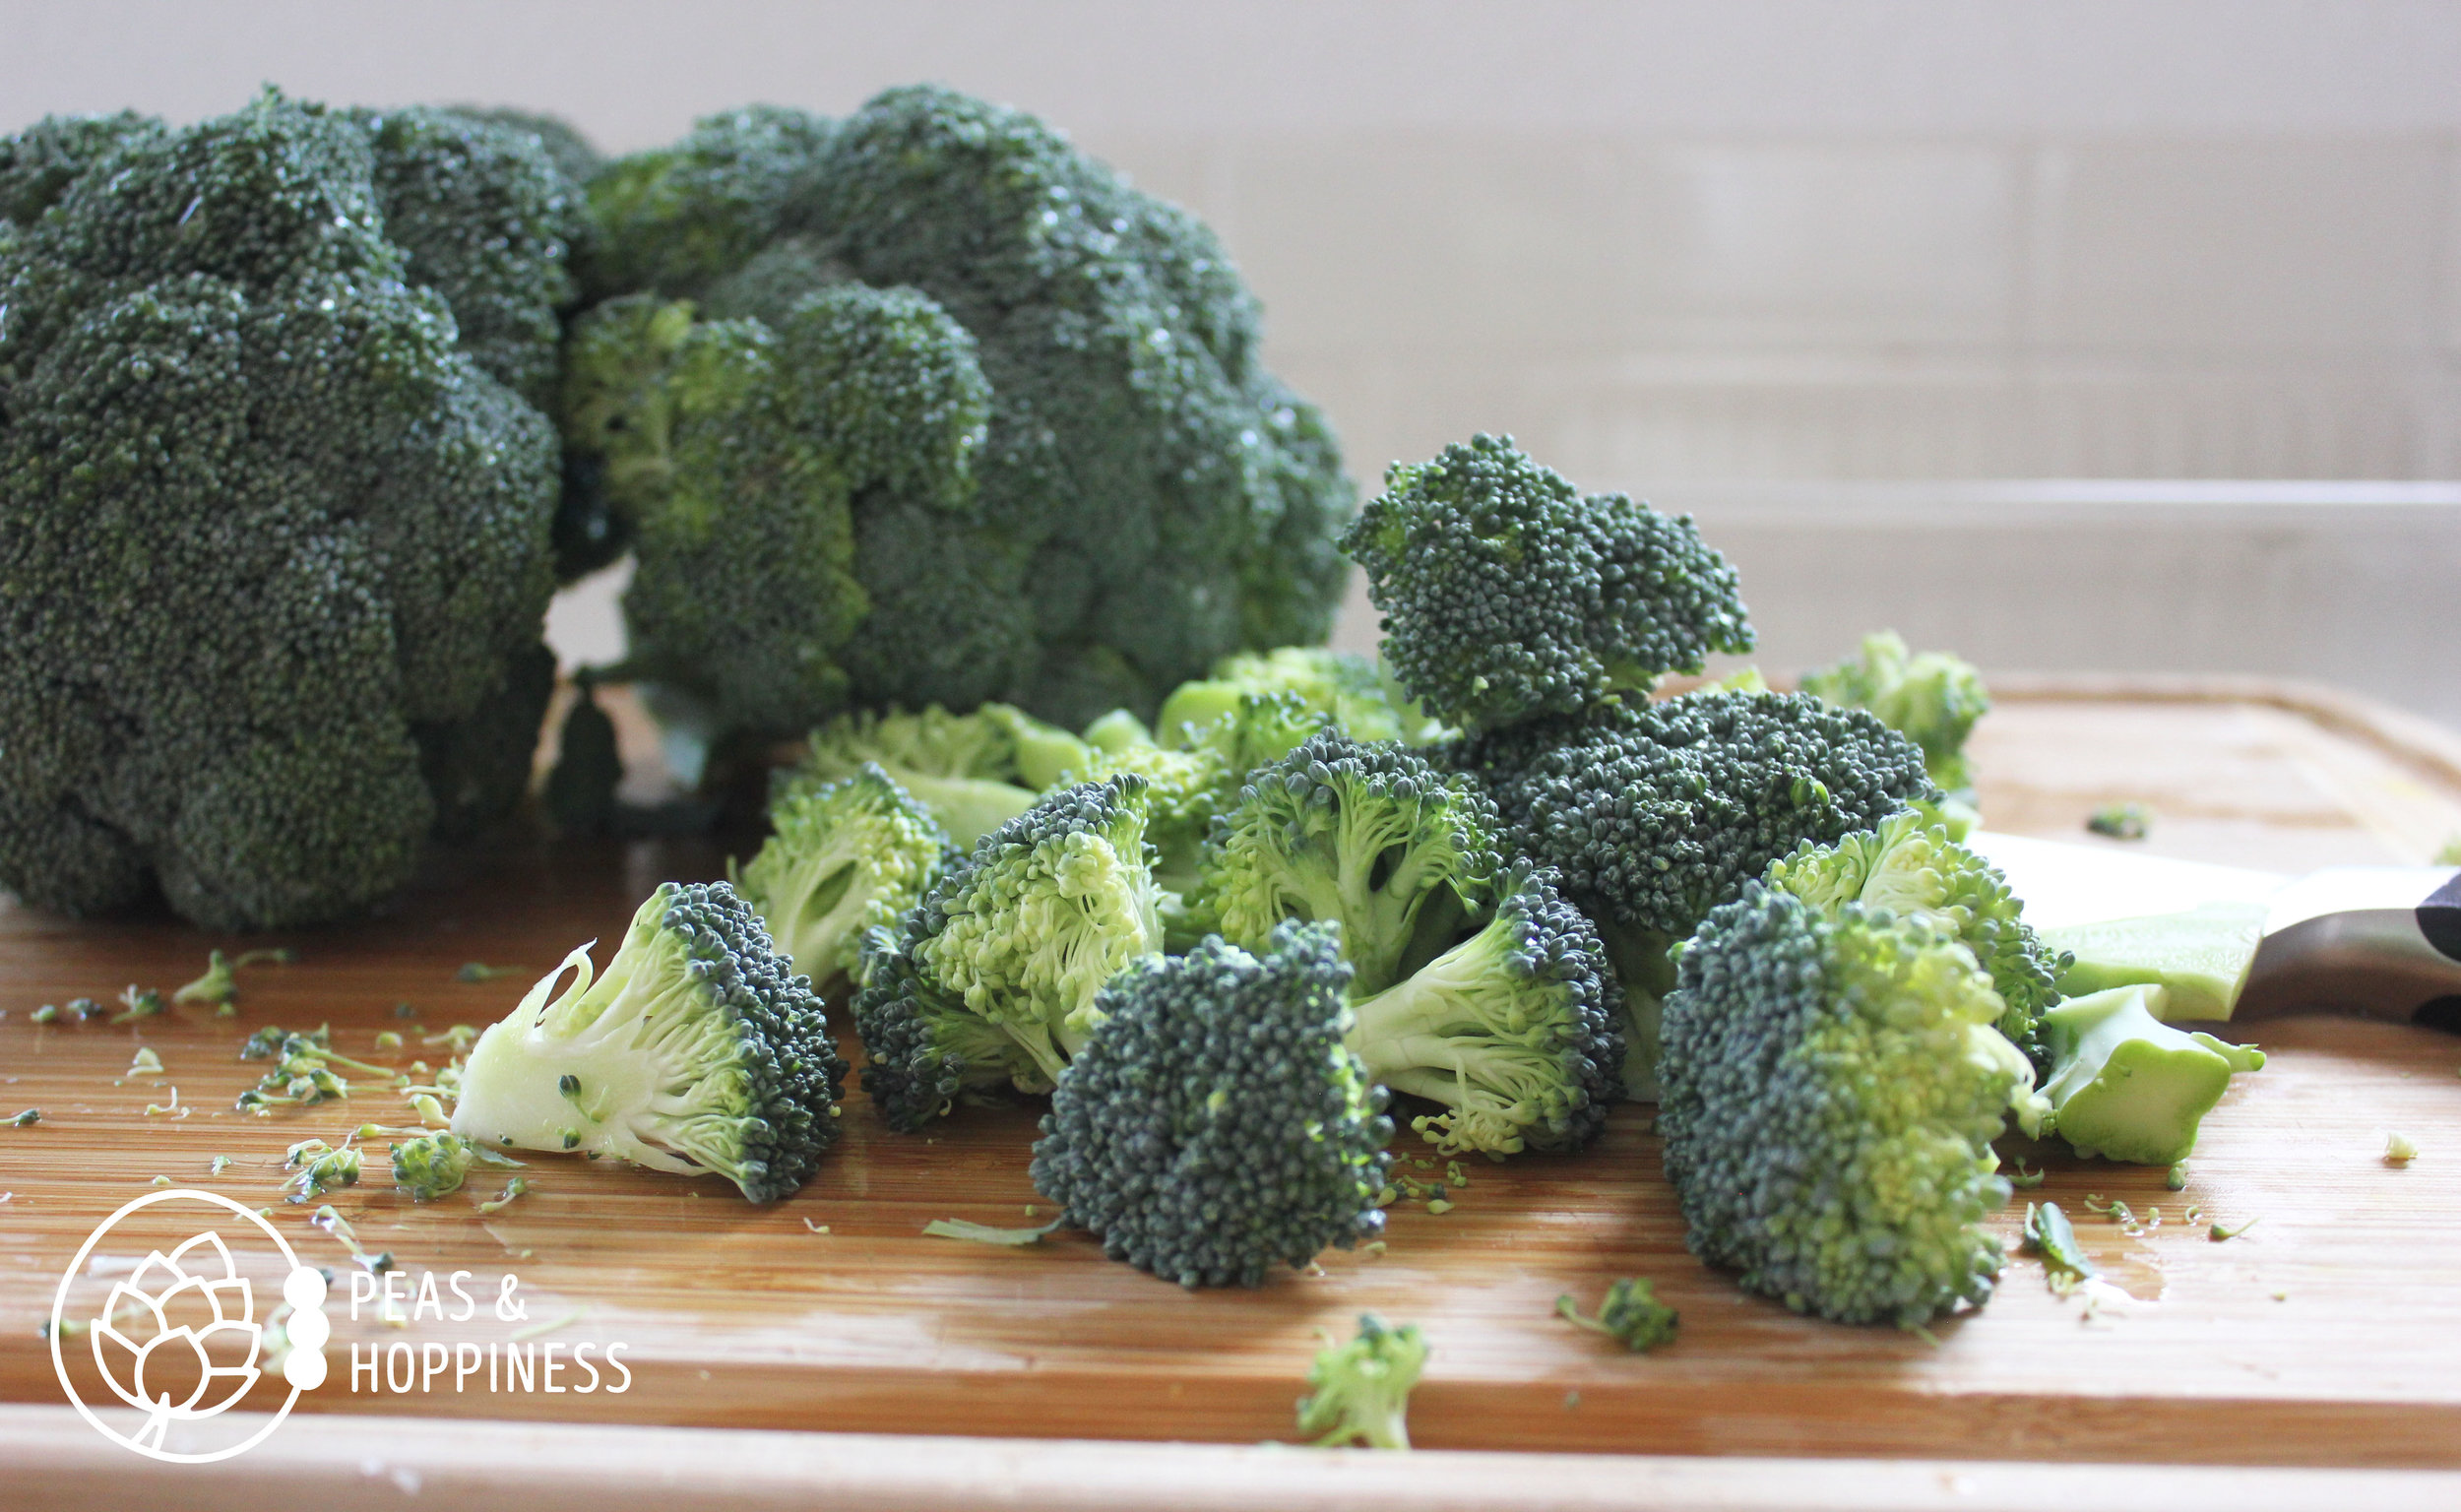 Tip #1 for practicing a keto diet: eat your non-starchy veggies! Try this recipe for Roasted Broccoli